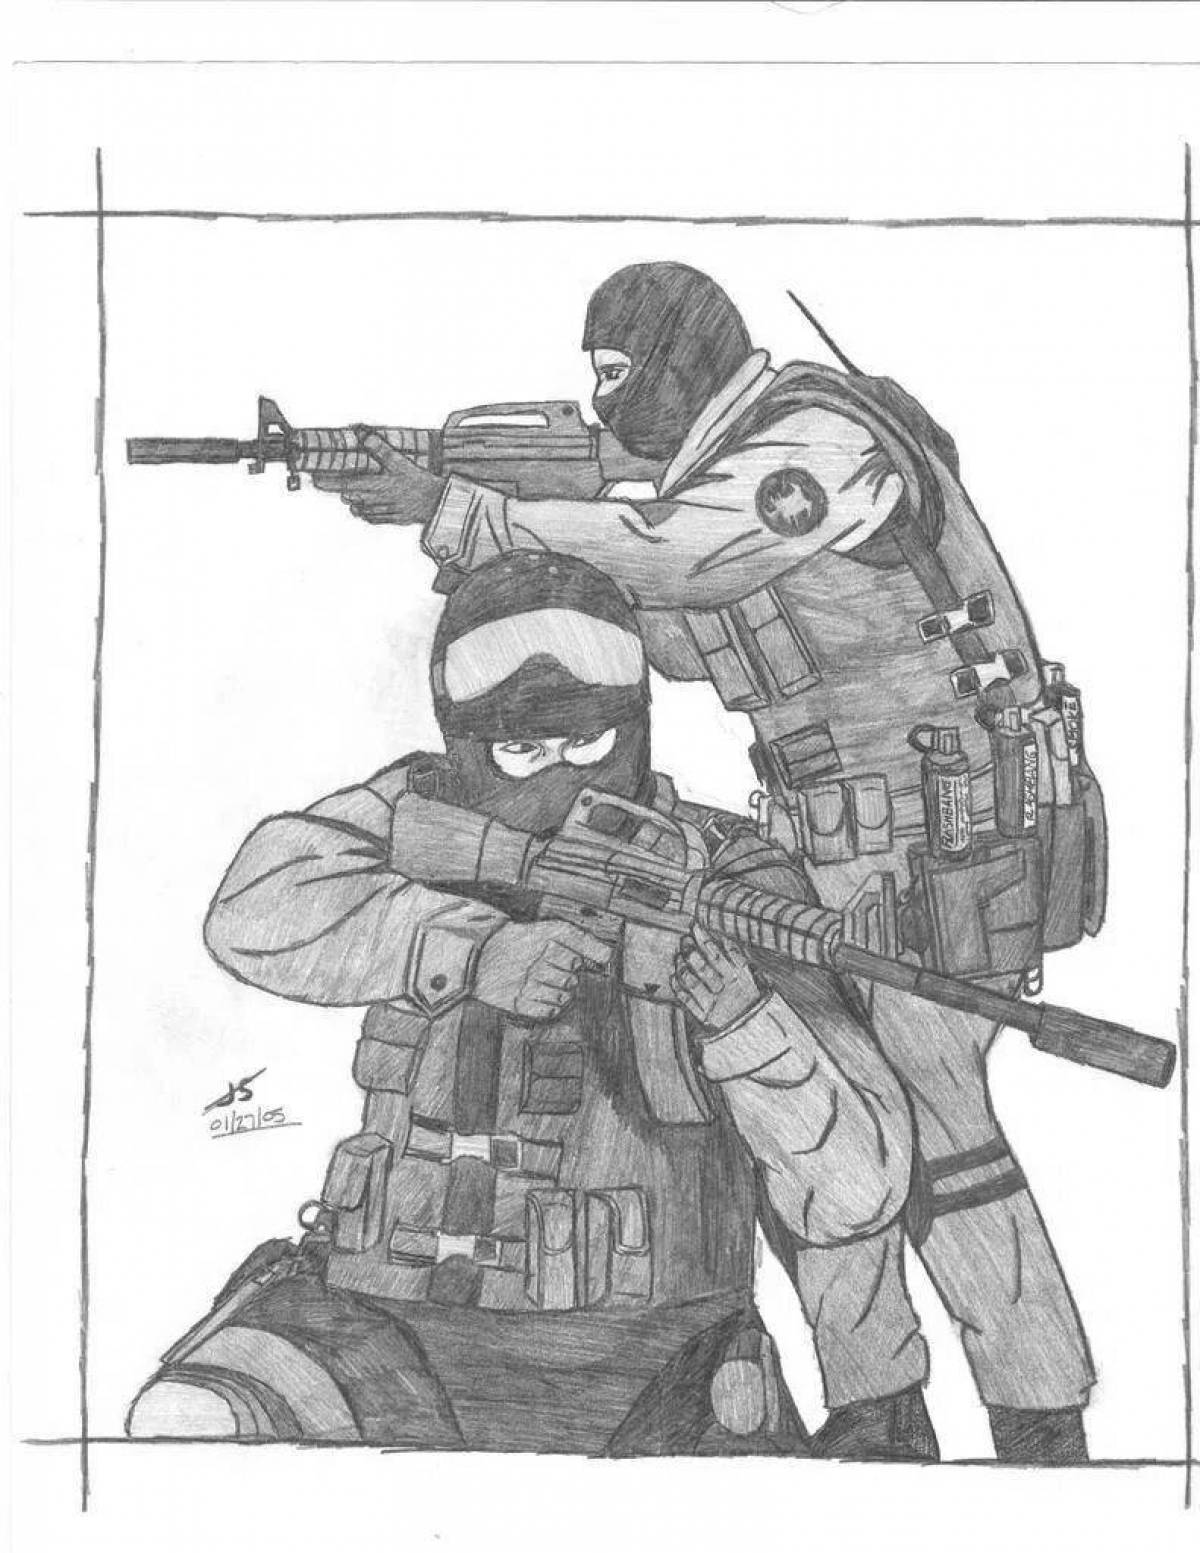 Counter strike colorful coloring page